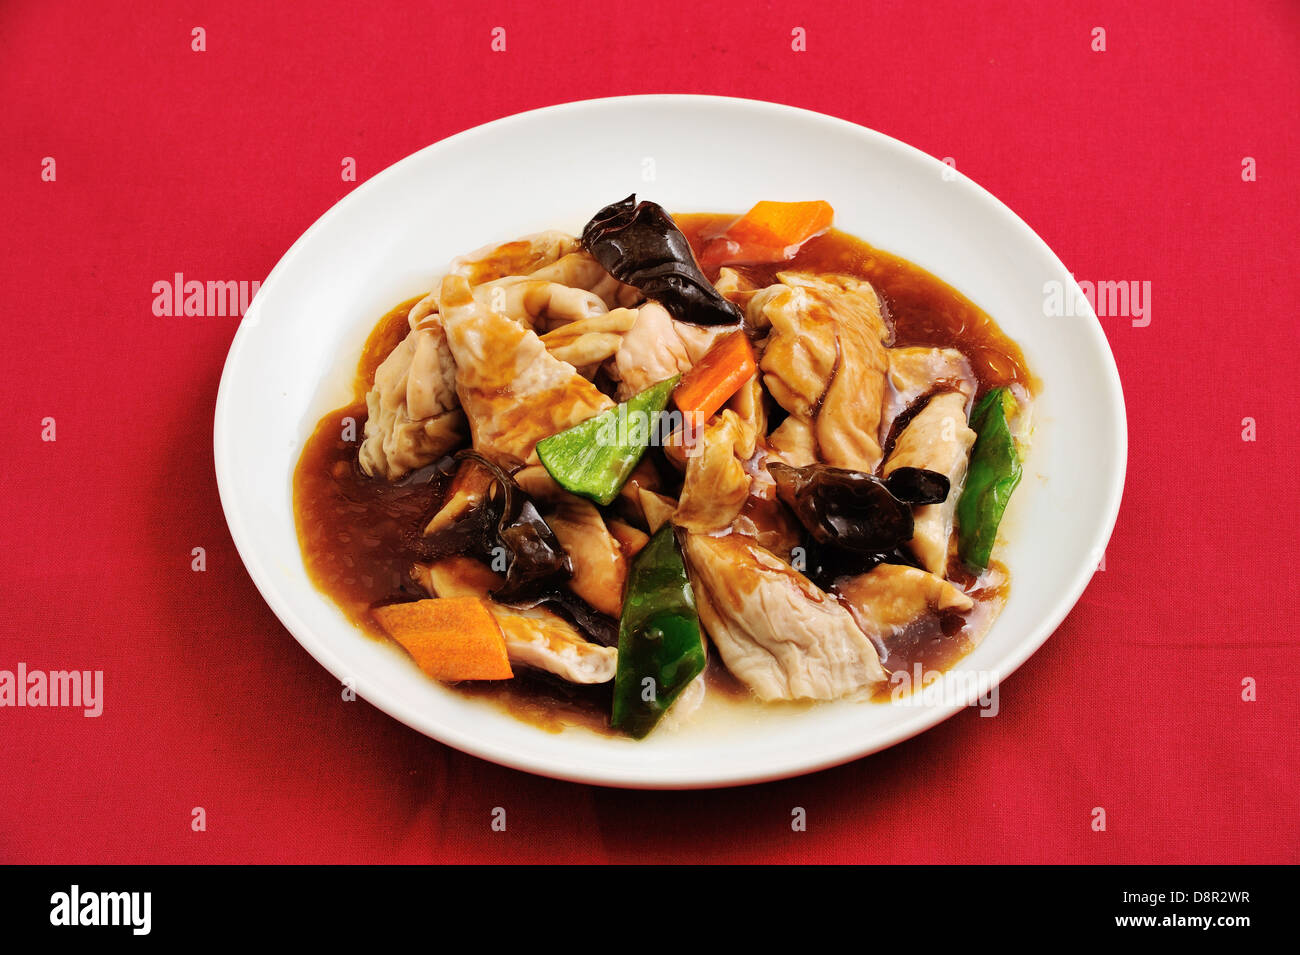 Stir-fried beef offal Stock Photo